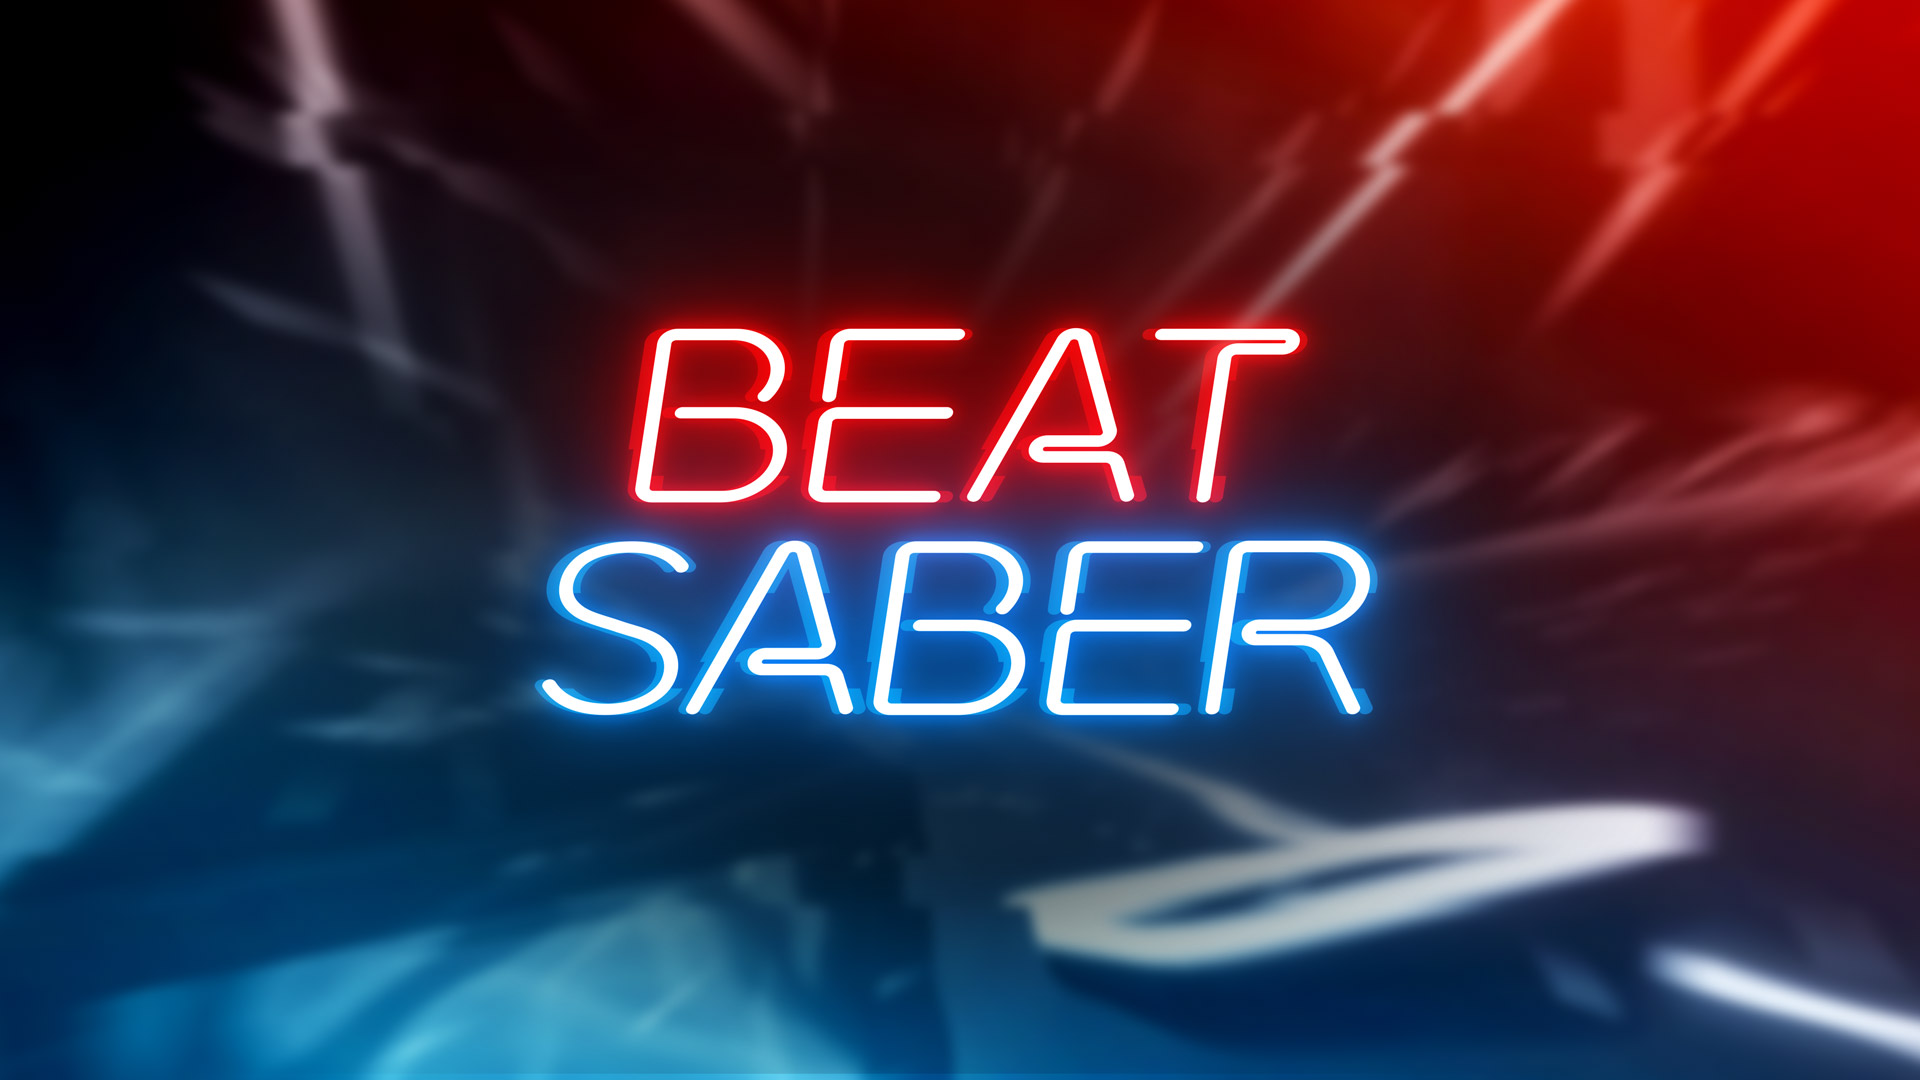 Petition For Greek To Play Beat Saber And Take Song Requests From